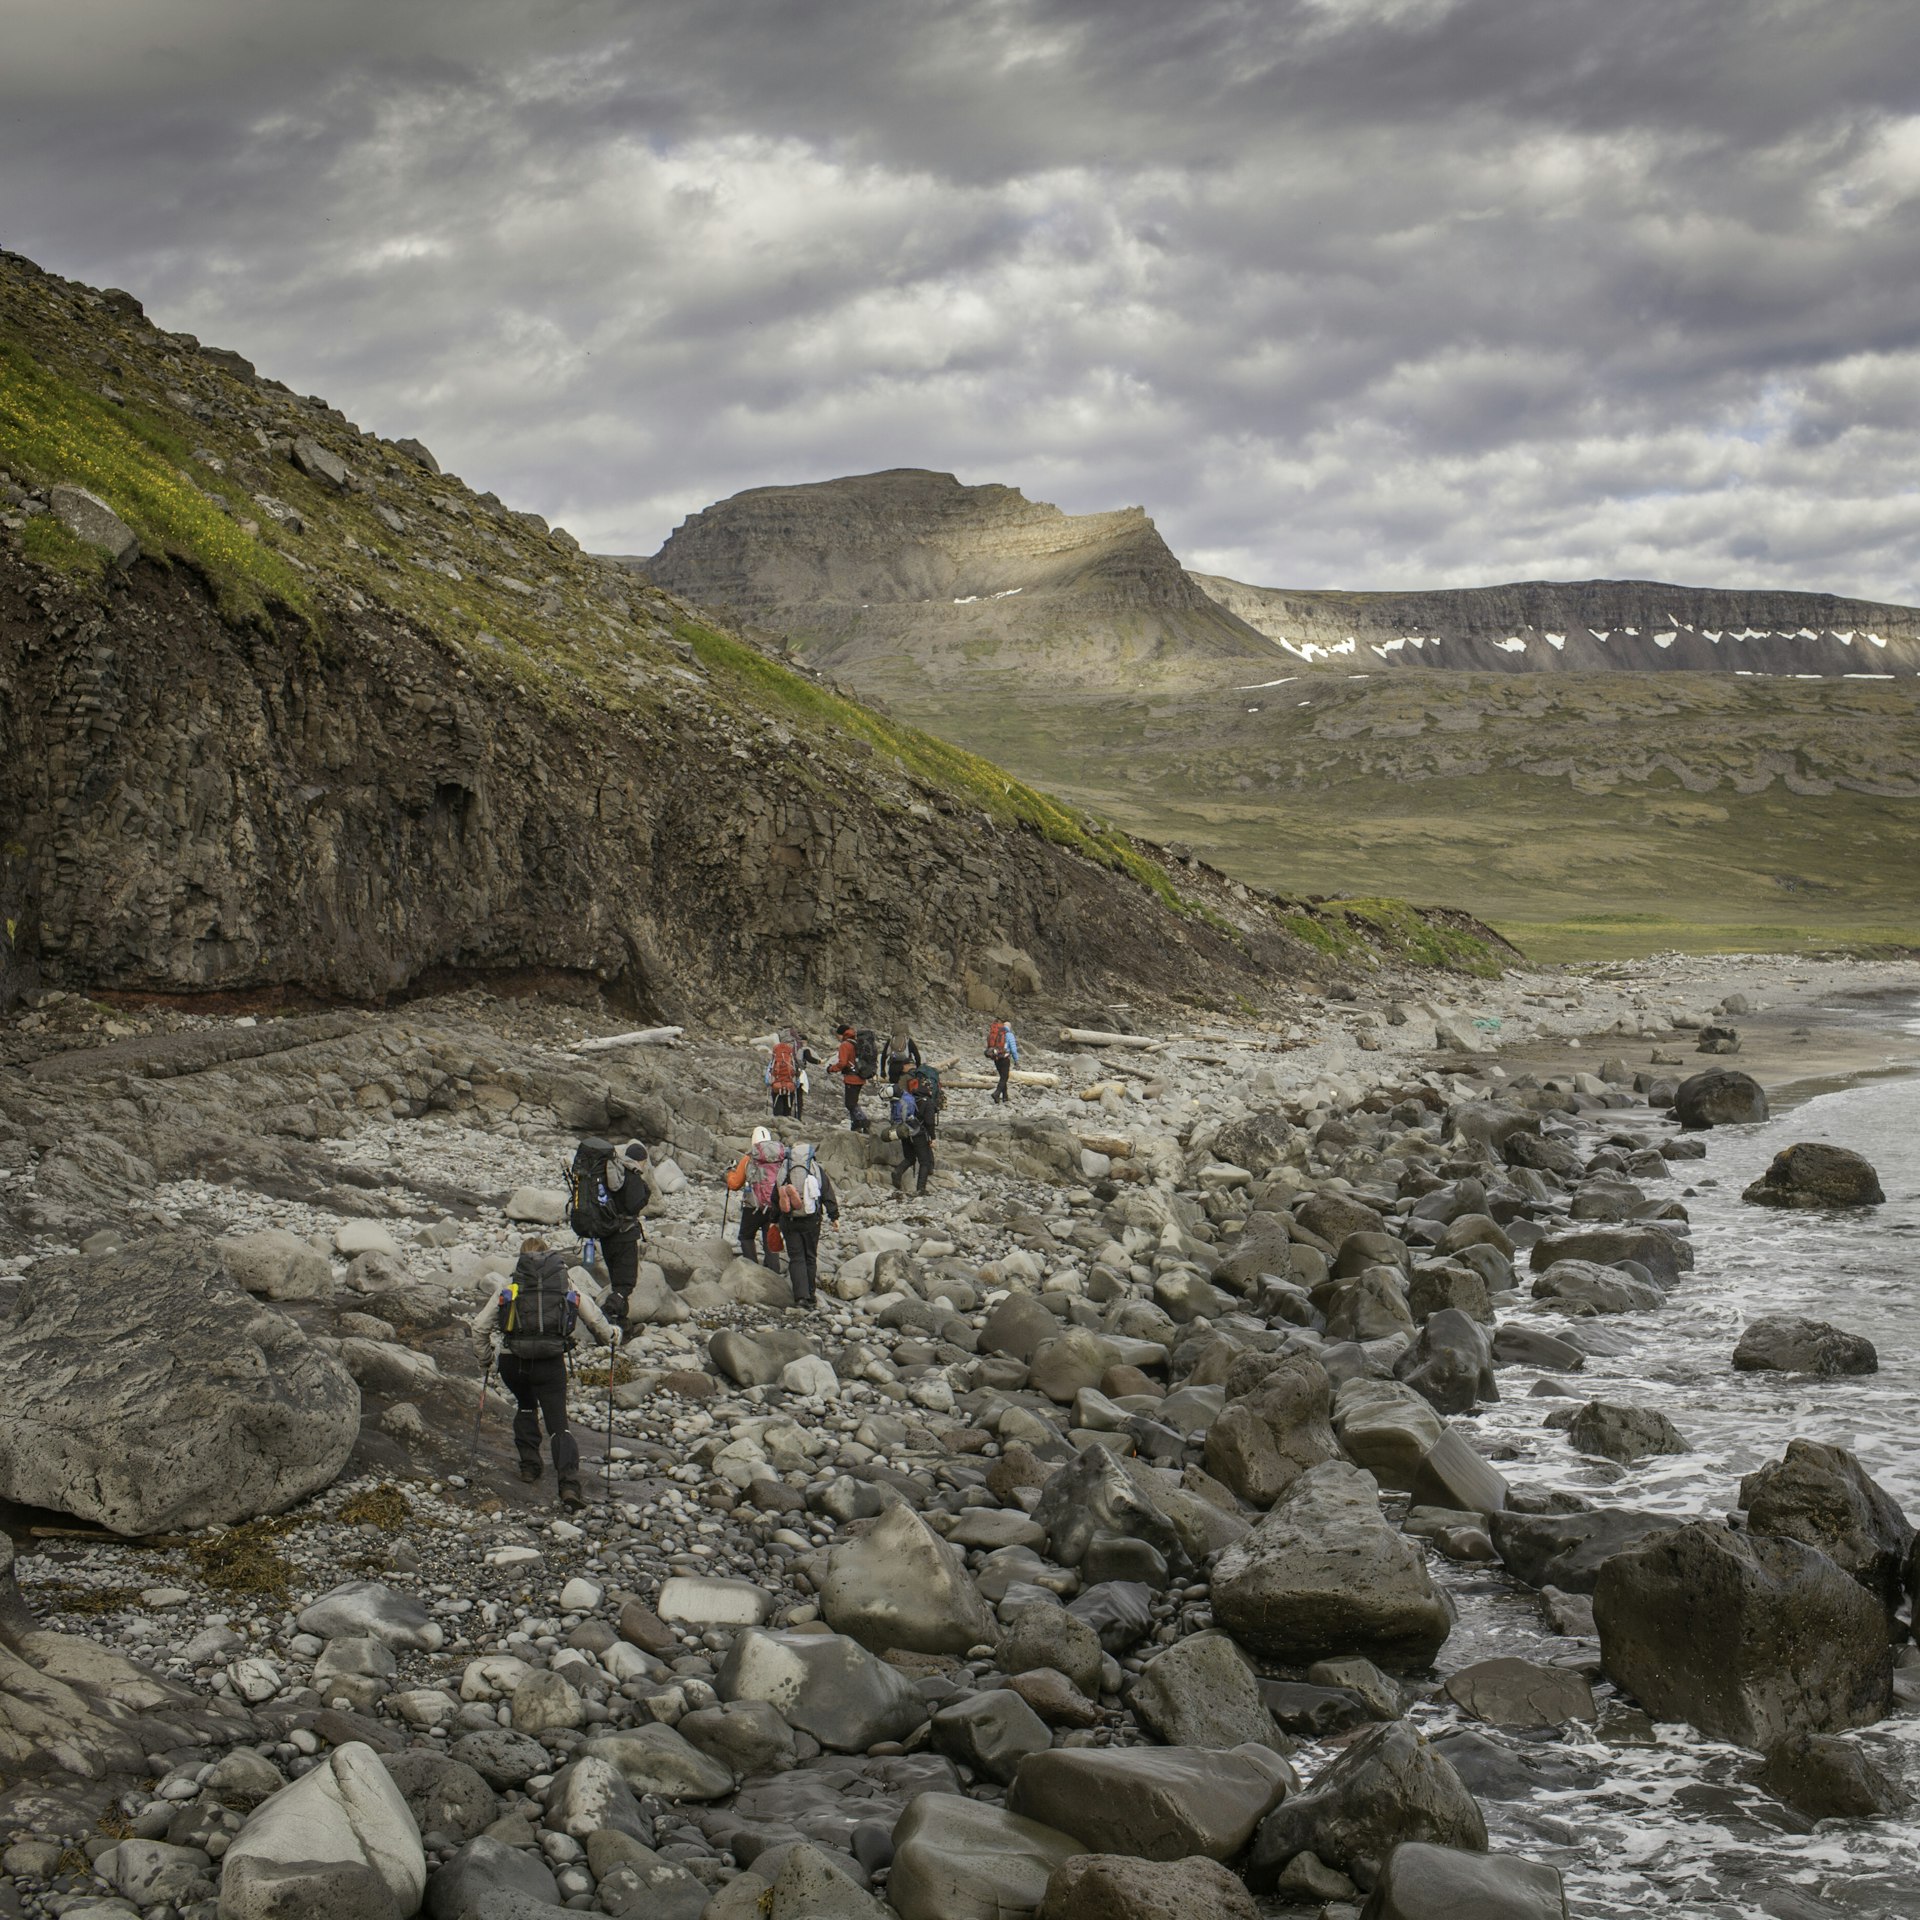 A group of hikers walking along a rocky shore, with mountains in the distance